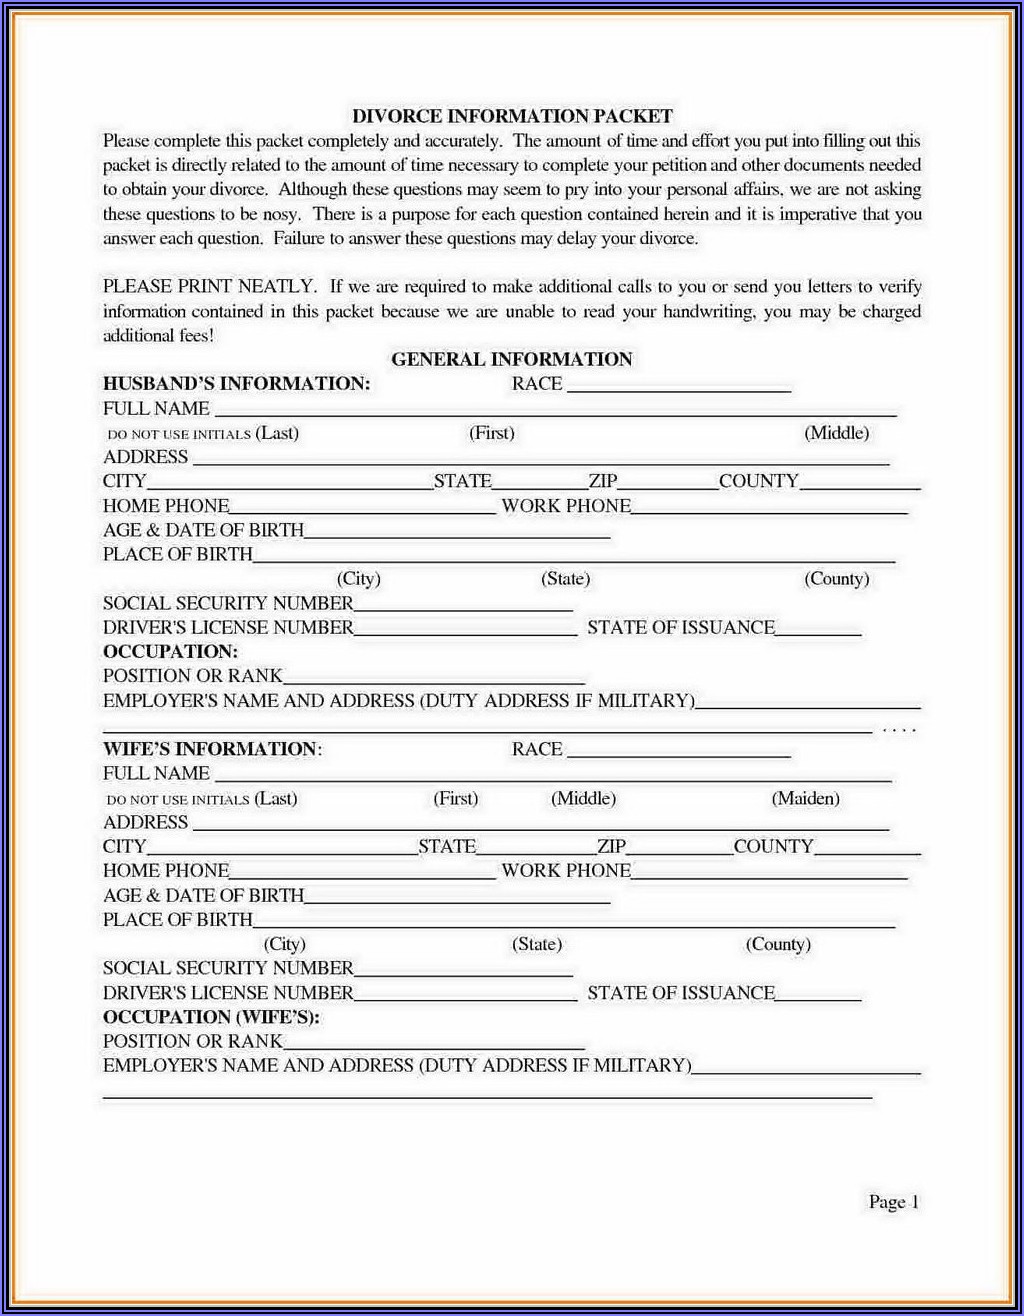 Forms Needed To File For Divorce In Texas